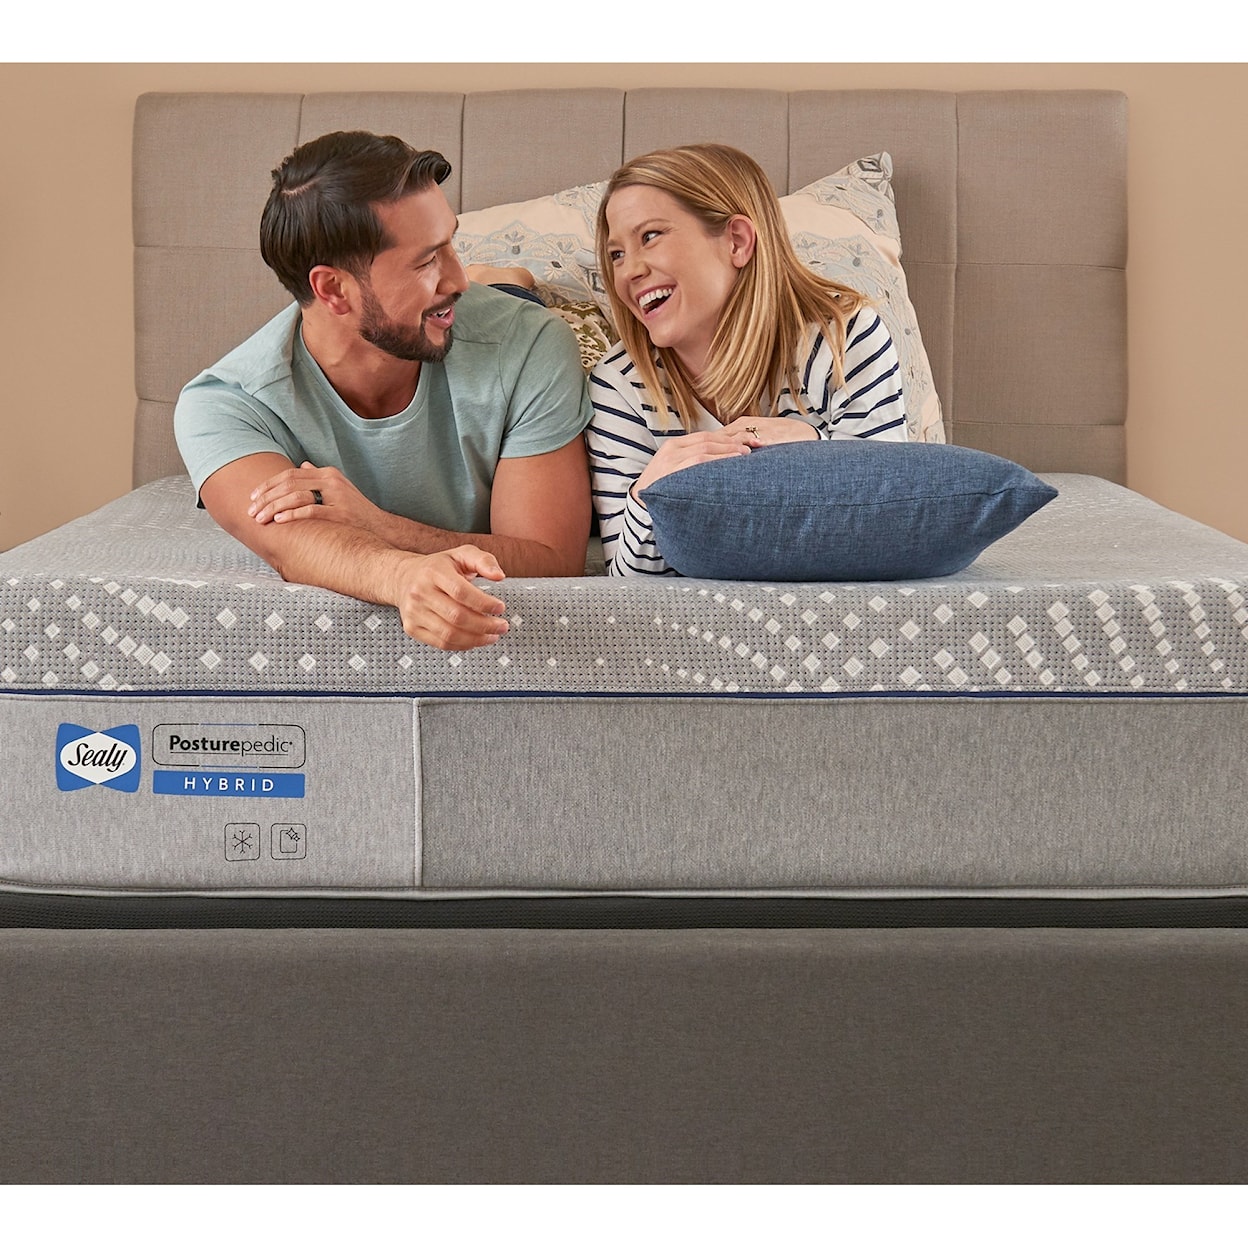 Sealy PPH5 Posturpedic Hybrid Firm Queen 13" Firm Hybrid Adjustable Set